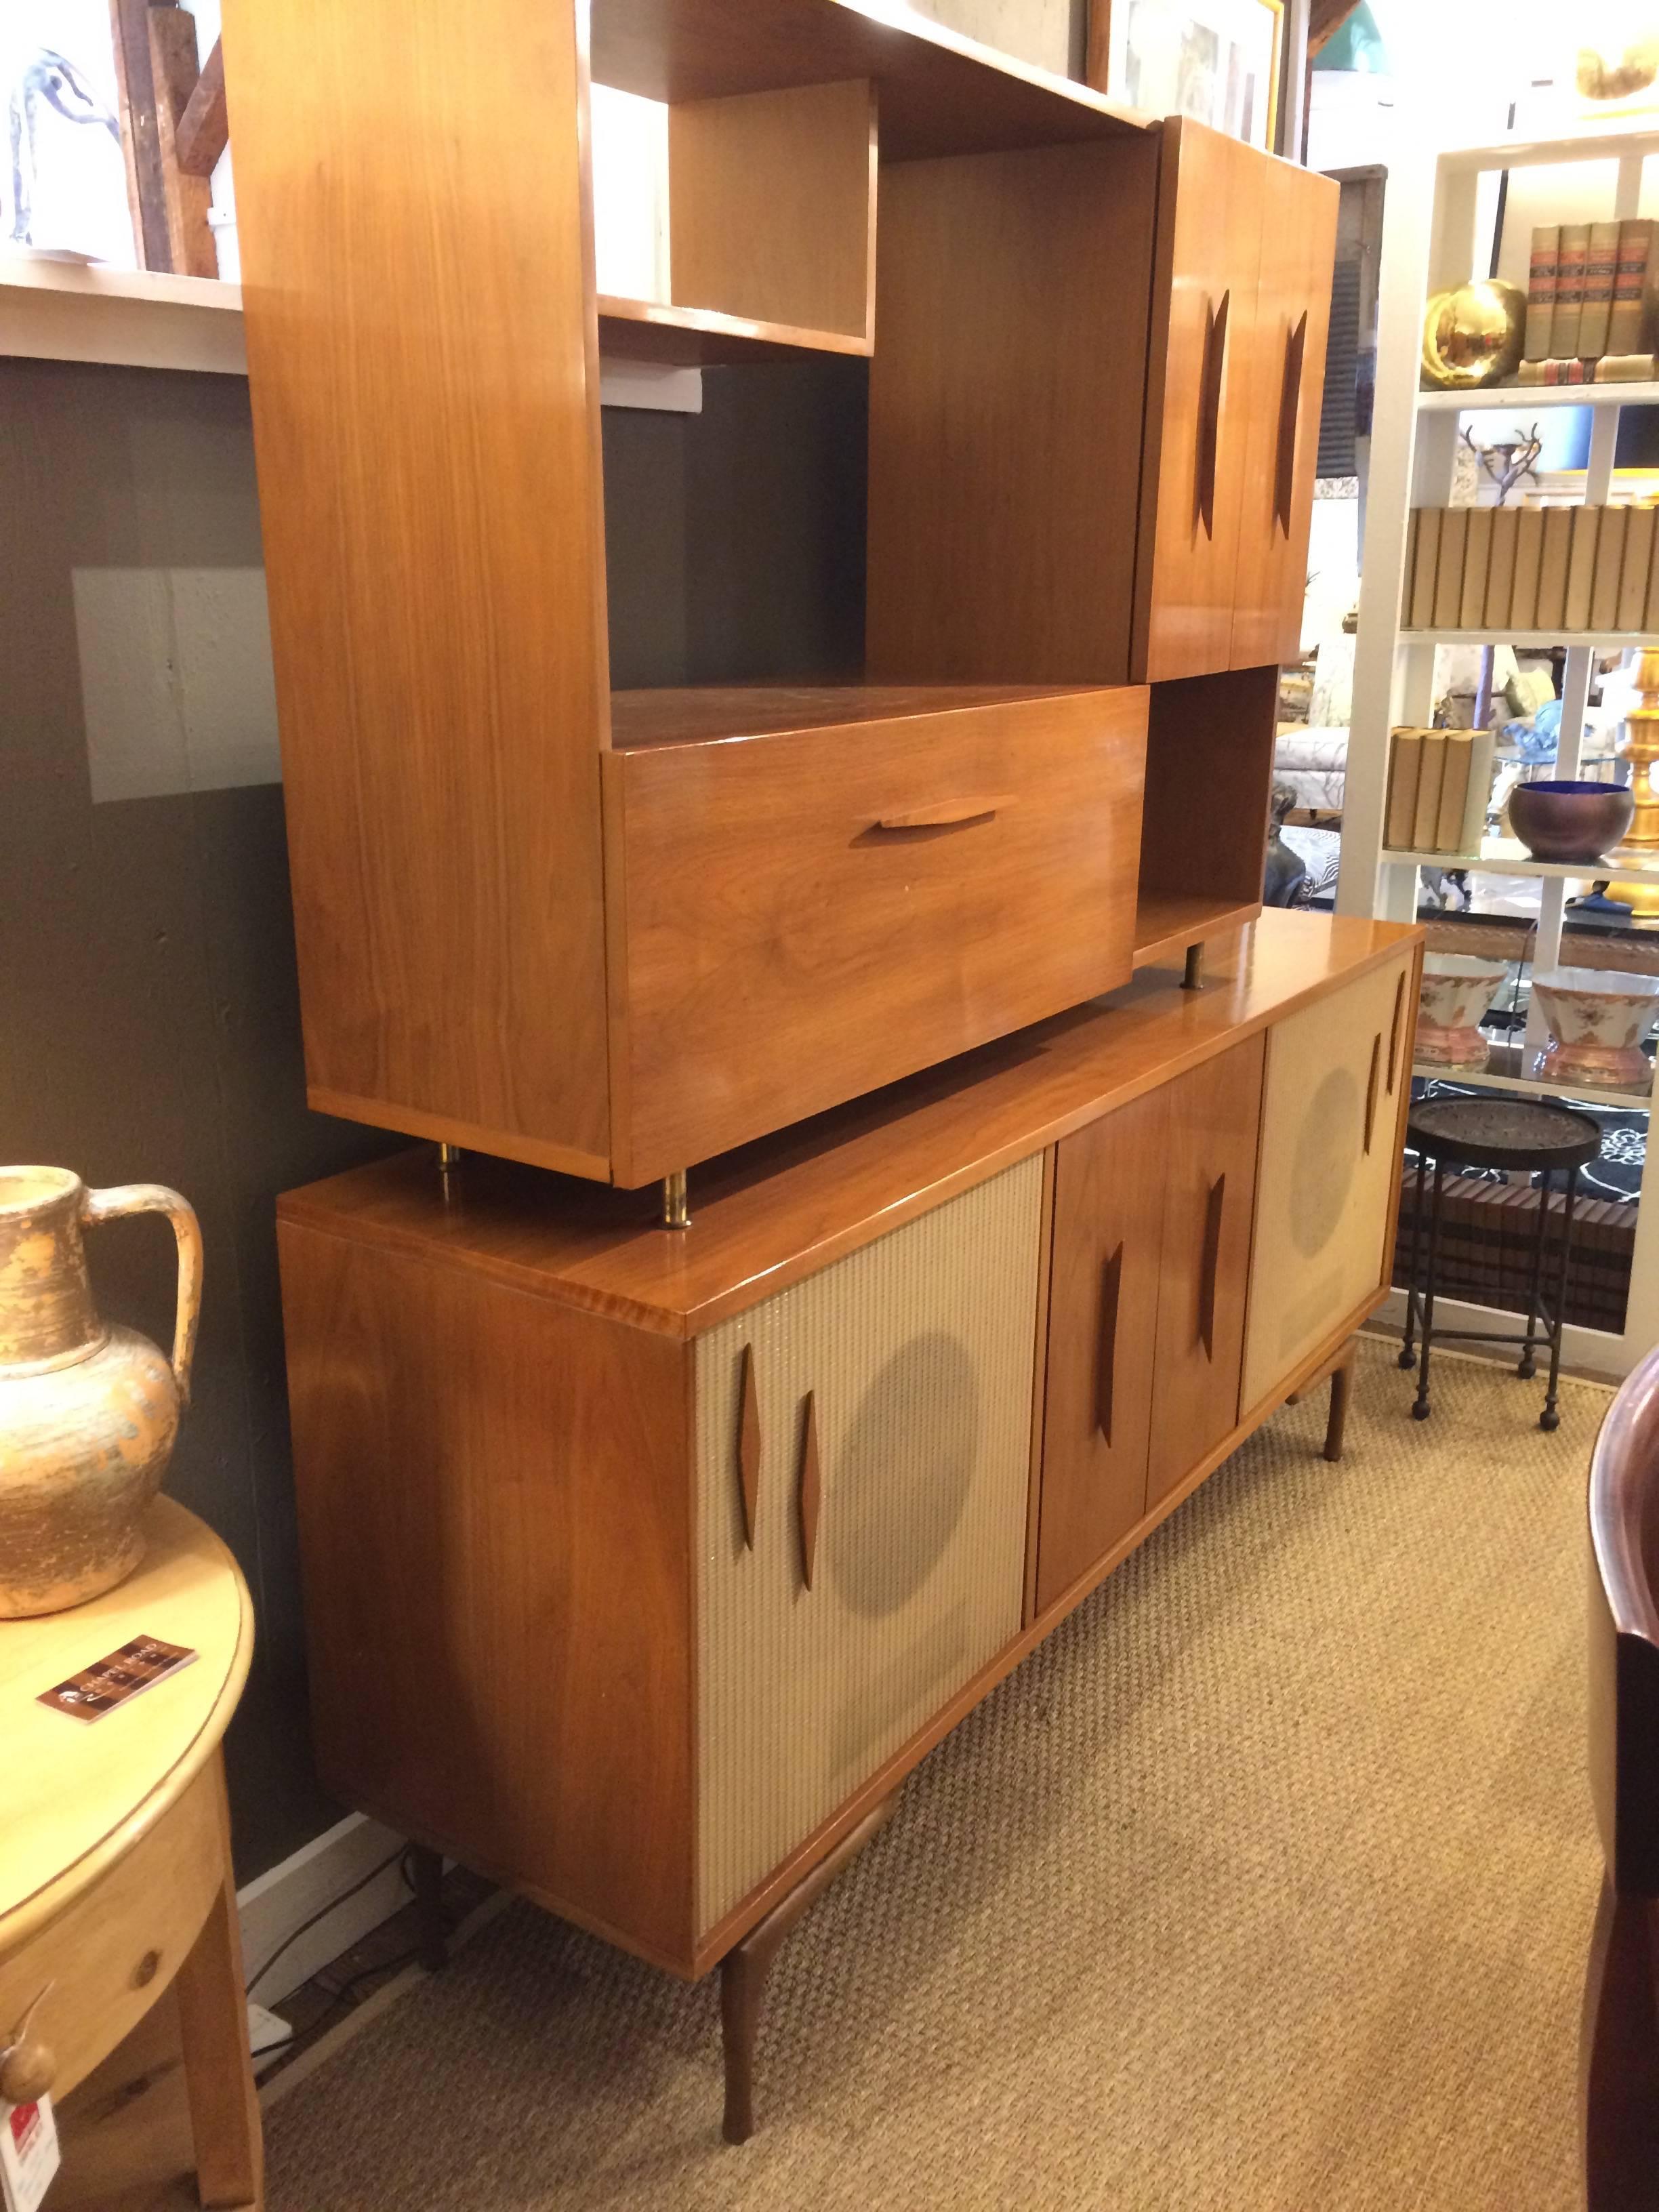 A totally mad men Mid-Century Modern two-piece walnut stereo cabinet and dry bar. Top piece has storage with adjustable shelf behind magnetized door panel as well as handsome open shelves. Bottom piece has pull down bar equipped with set of original